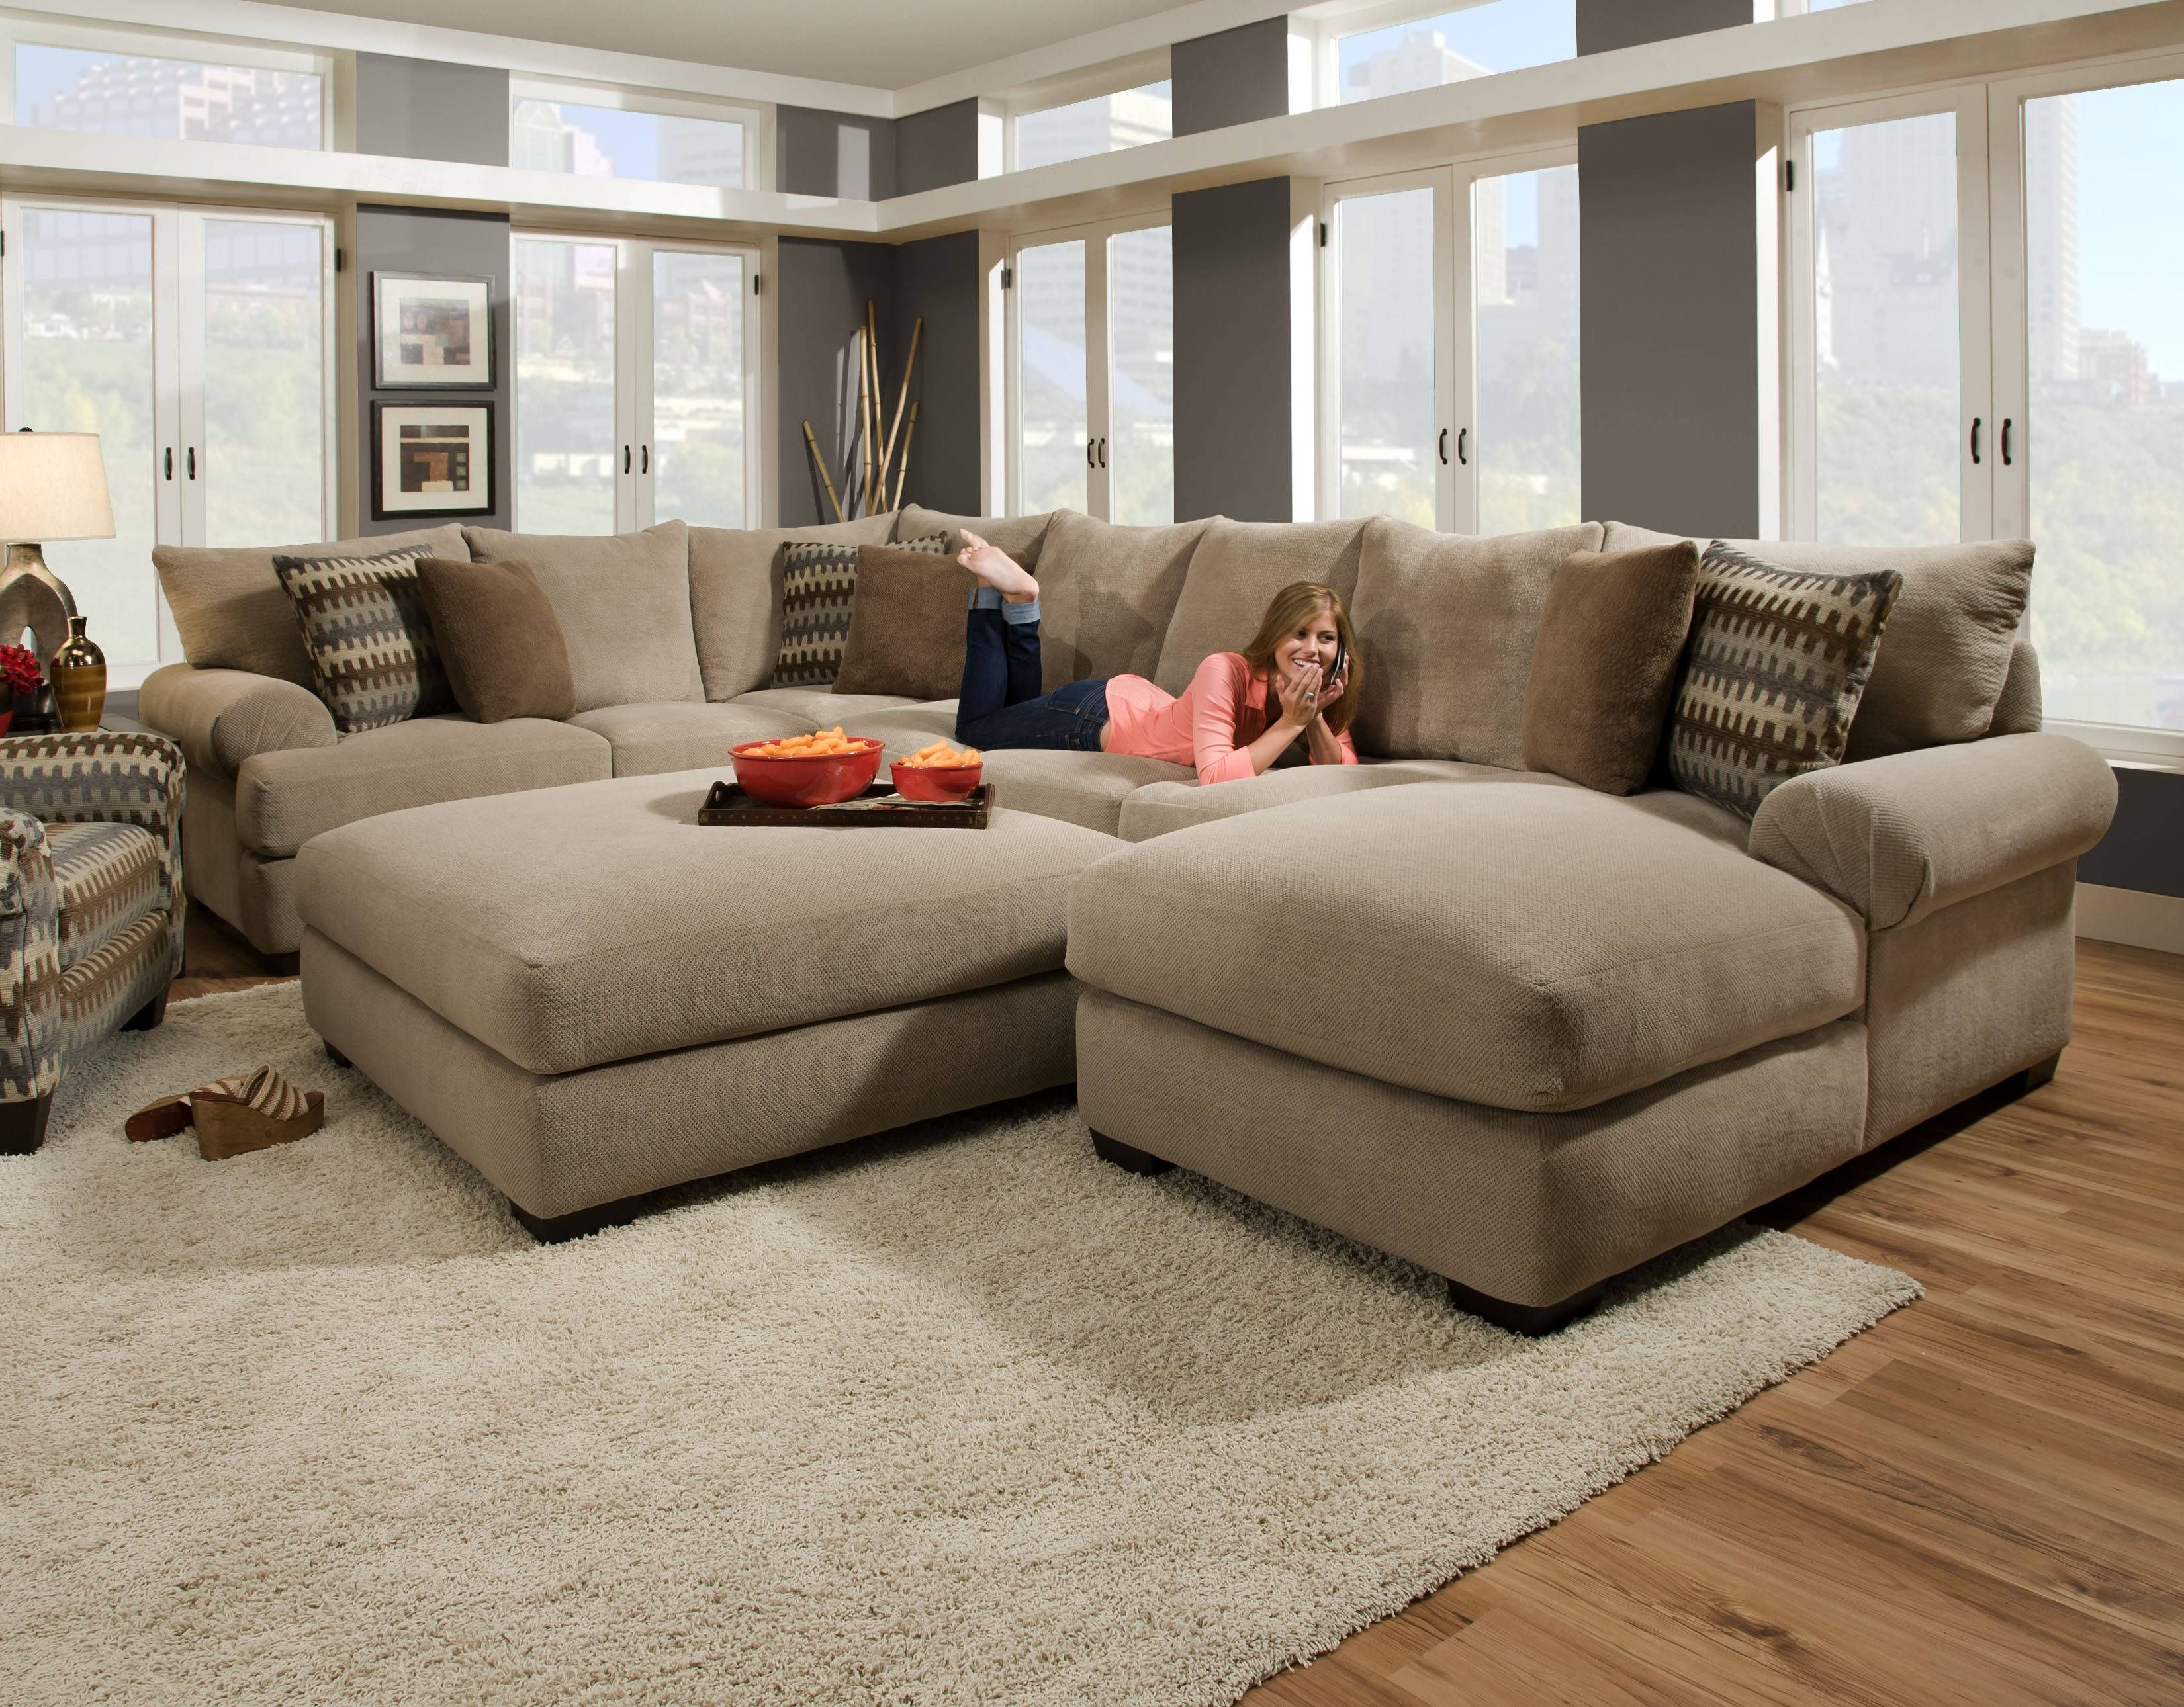 Furniture: Extra Large Sectional Sofa | Modular Sofa Sectional Intended For Giant Sofas (View 1 of 15)